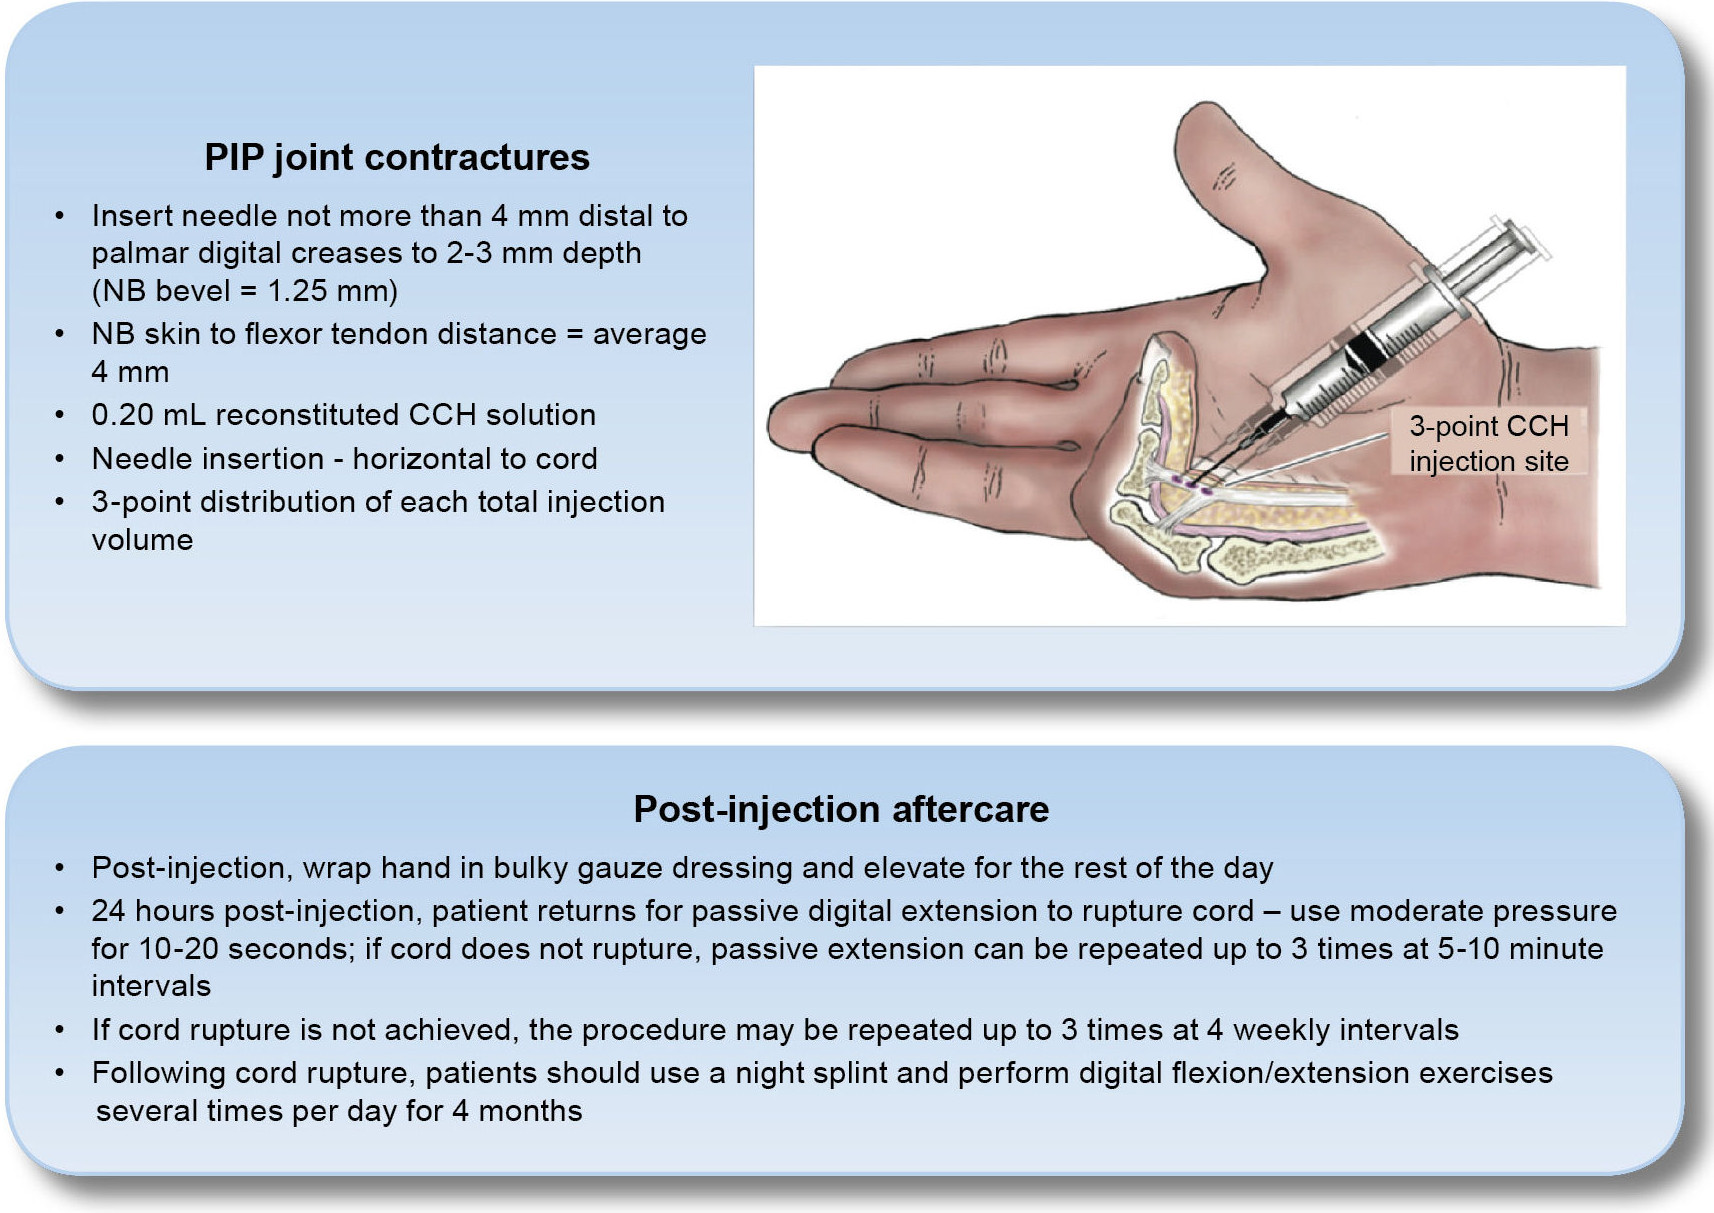 Figure 15: CCH injection technique for MP and PIP joints and suggested aftercare